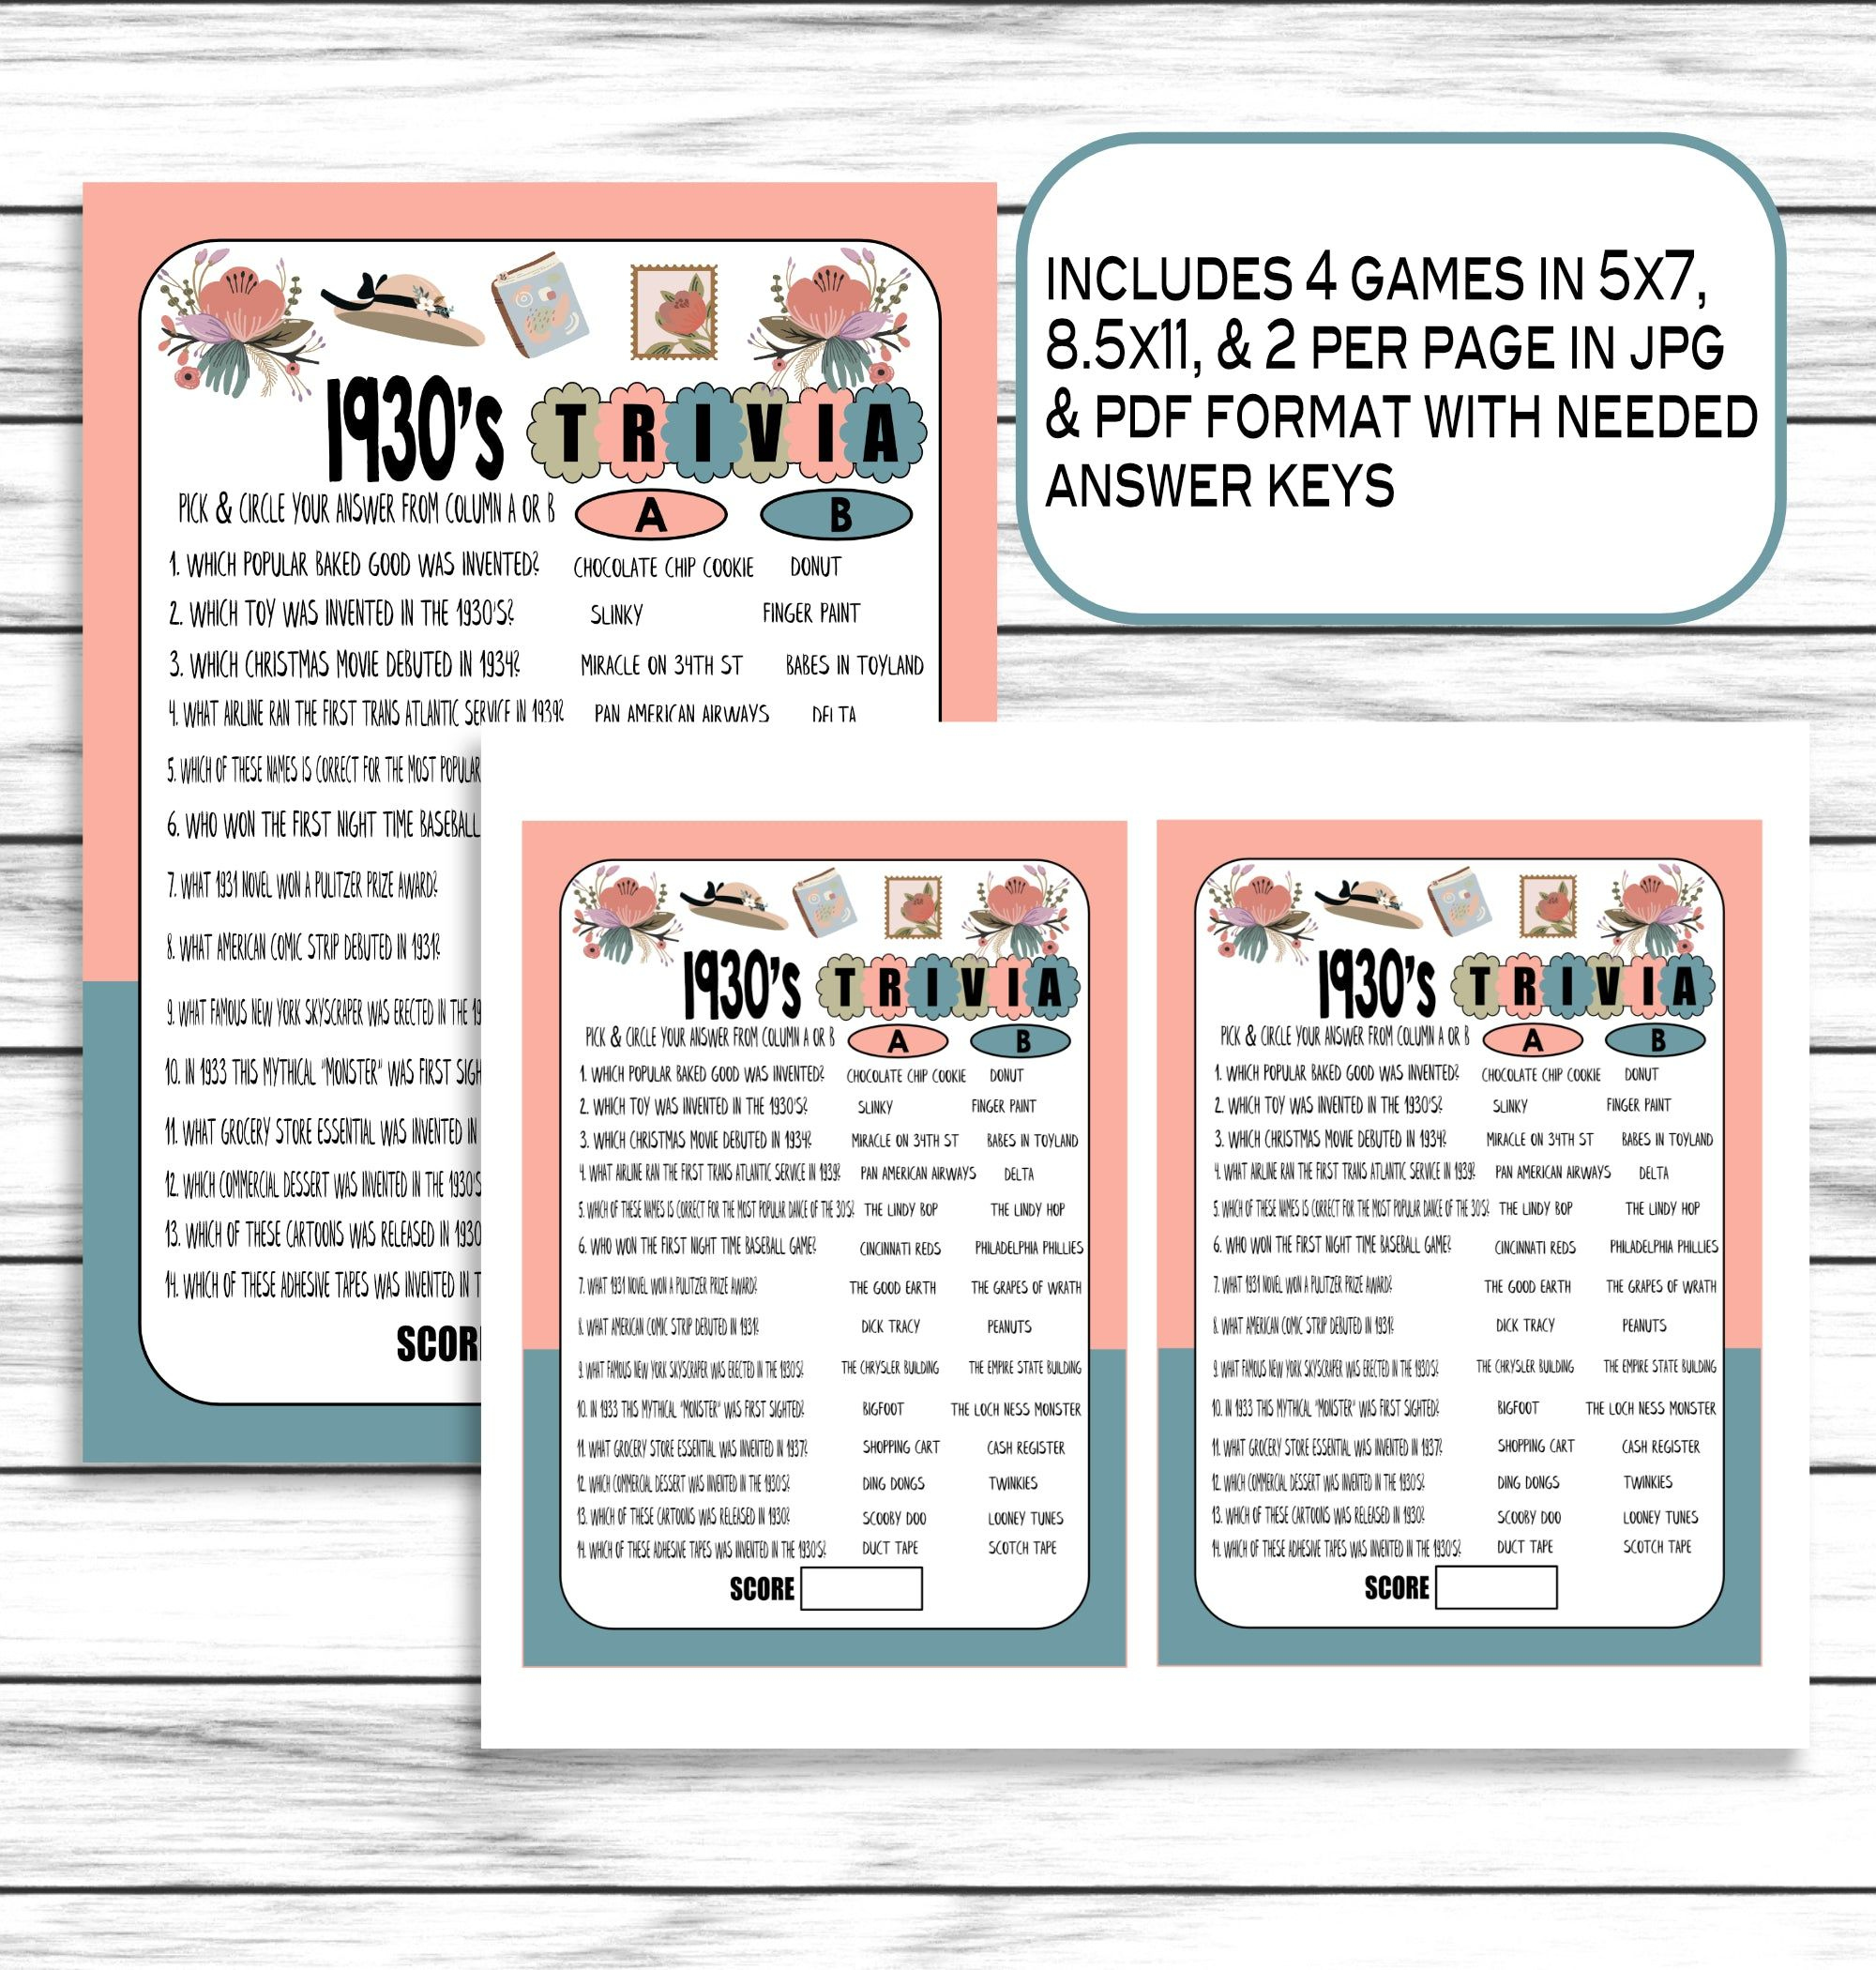 90th Birthday Party Games 90th Birthday Ideas 1932 Trivia Game Price 